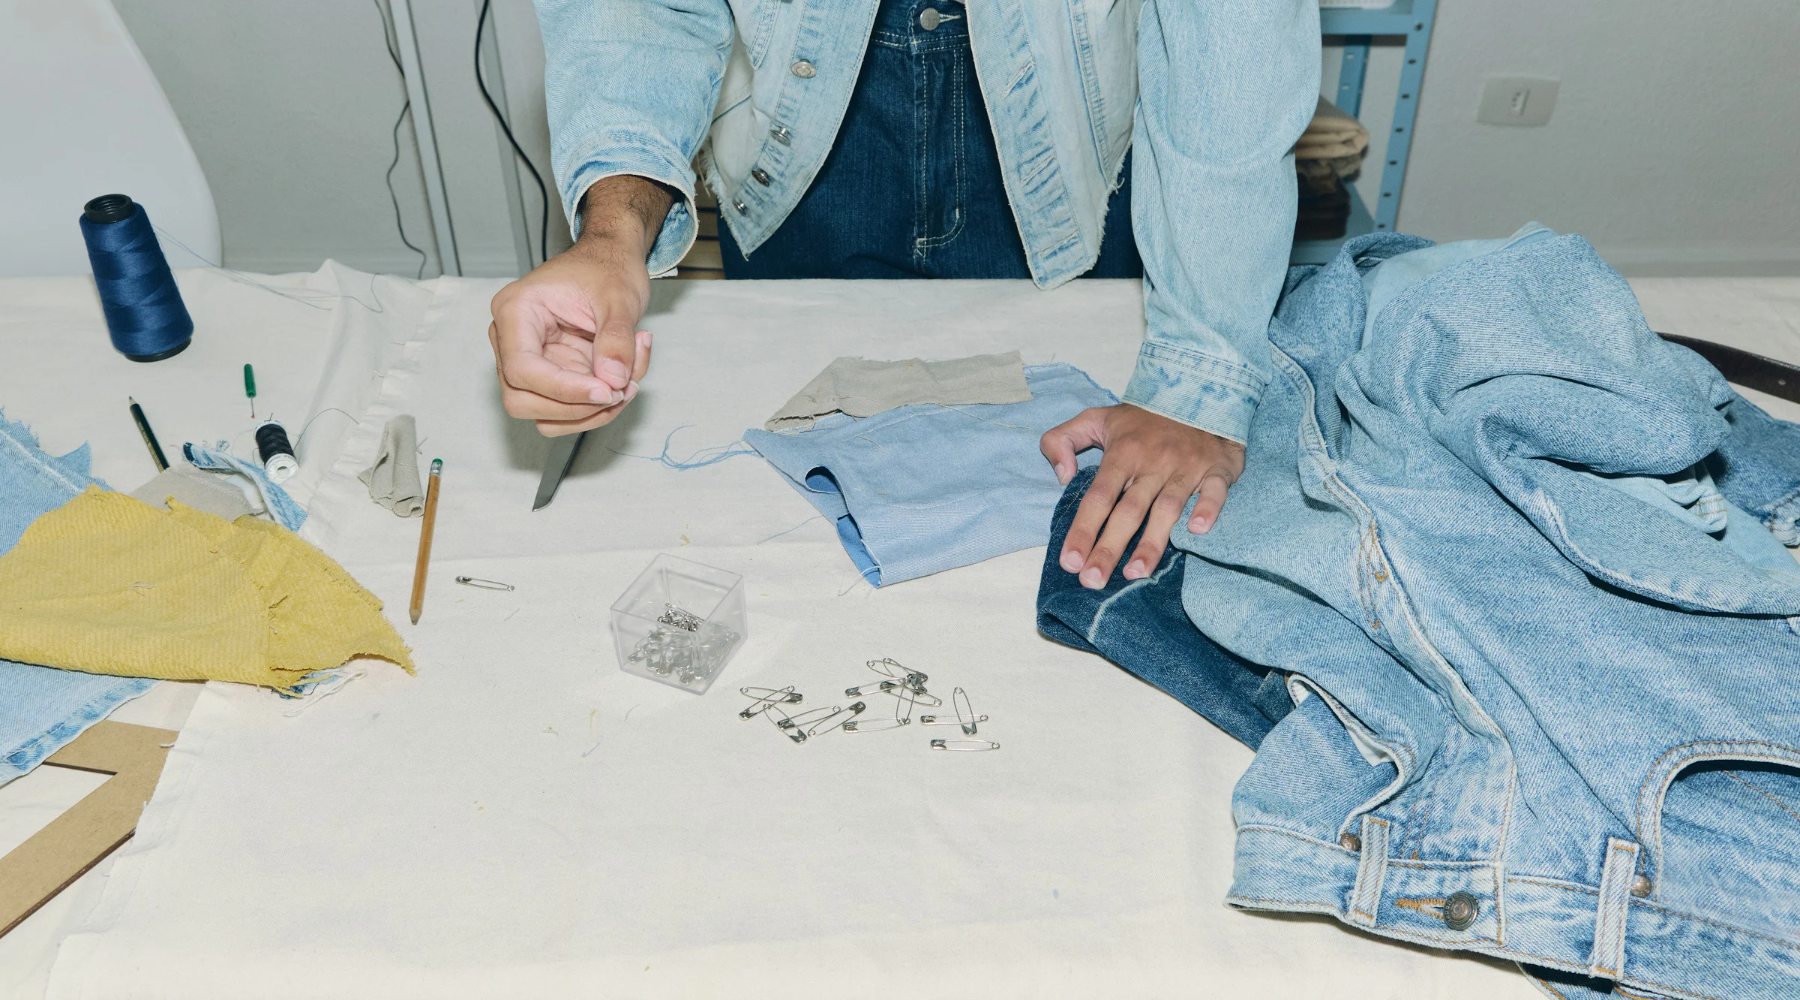 A tailor making something new out of old jeans.